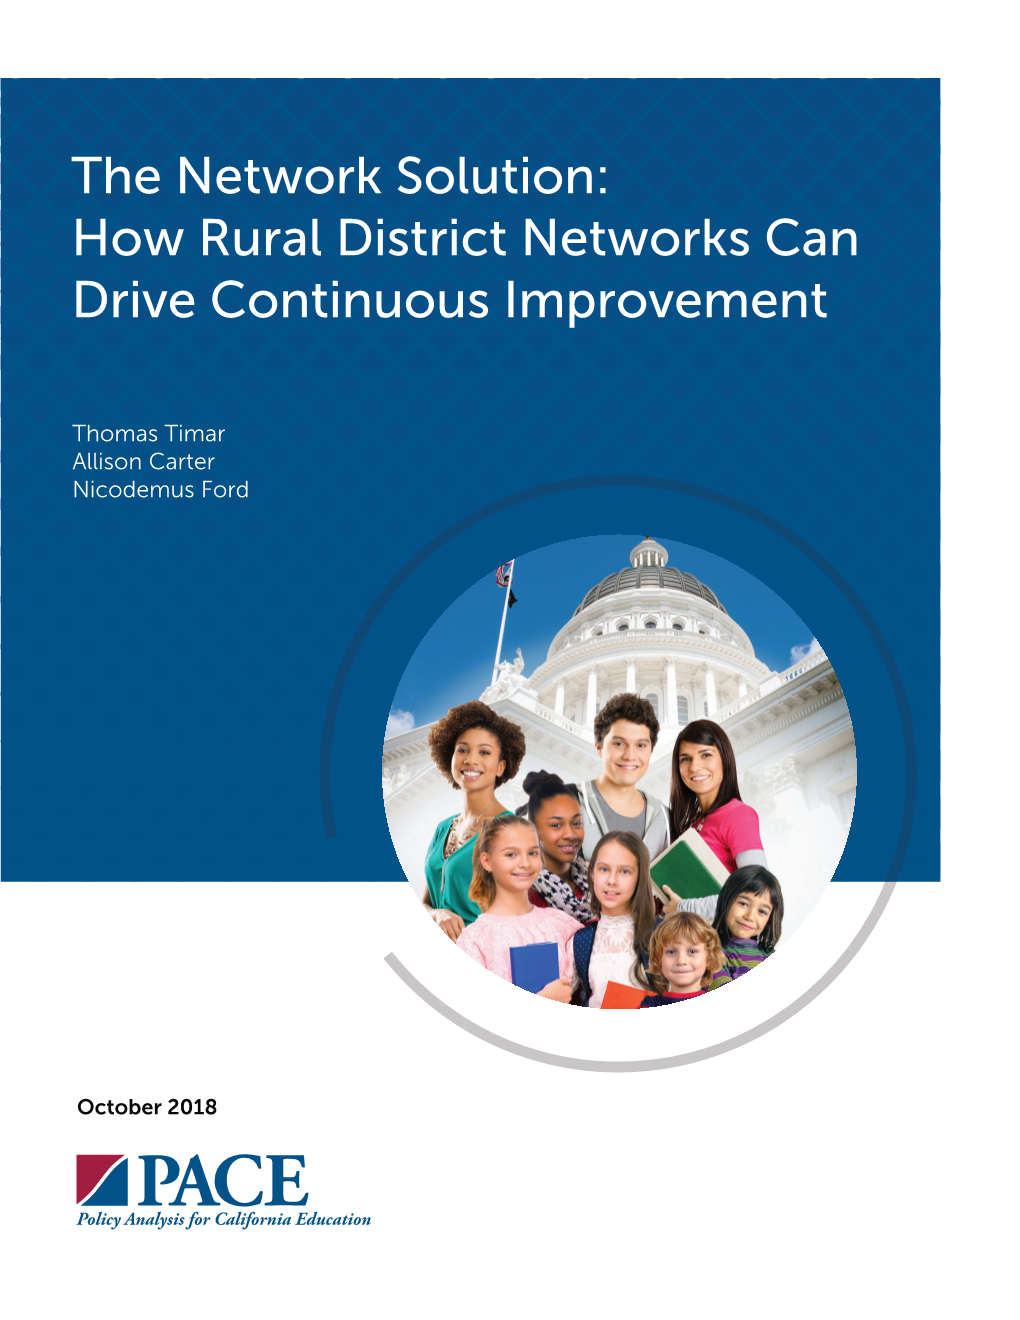 The Network Solution: How Rural District Networks Can Drive Continuous Improvement